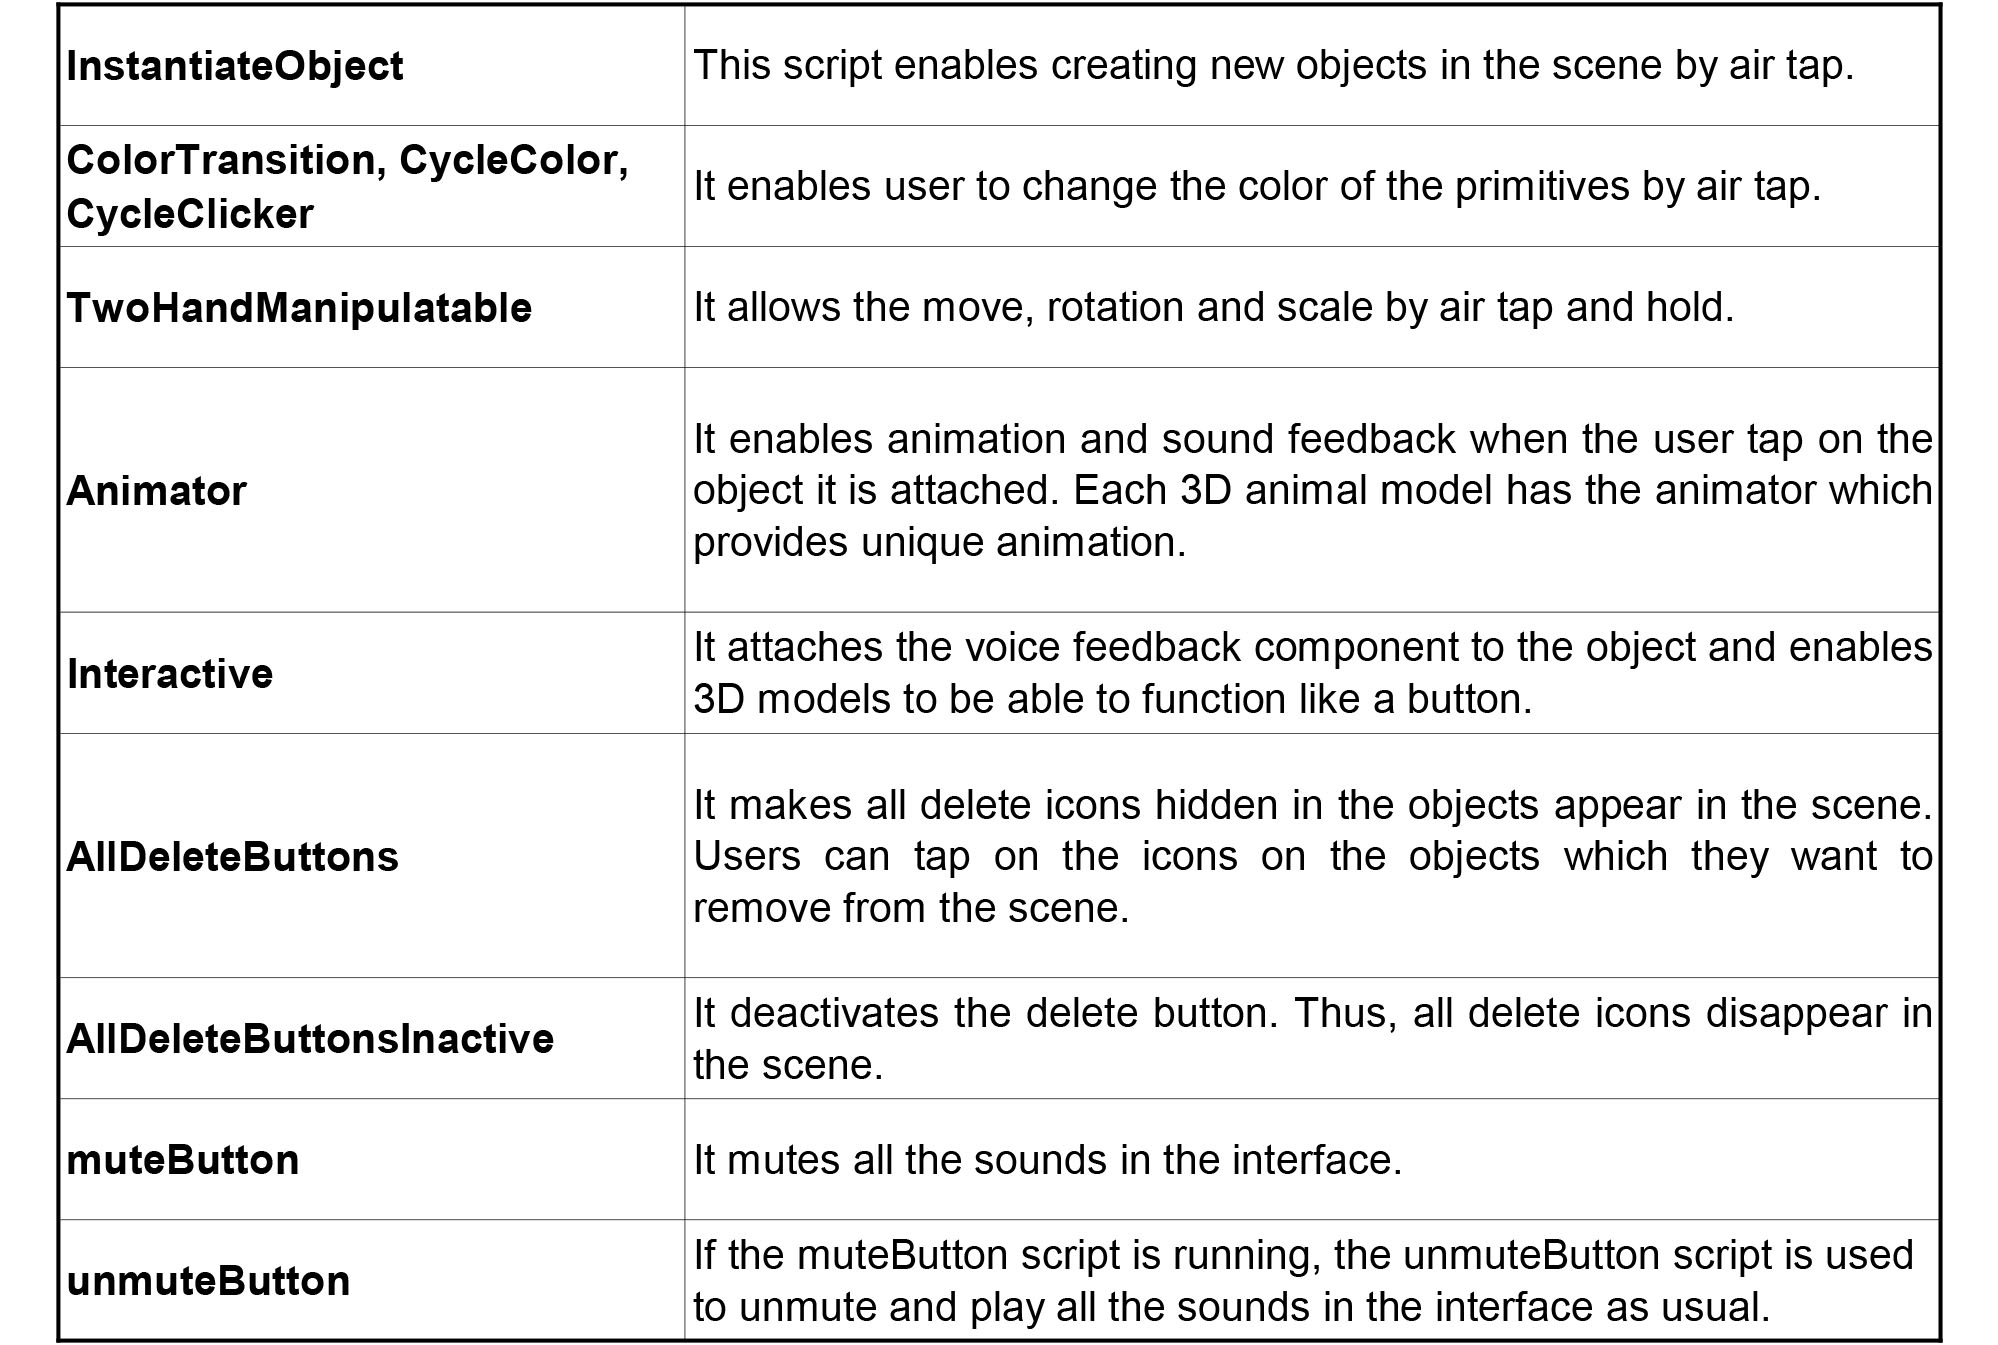 Table 7: Key interaction scripts.